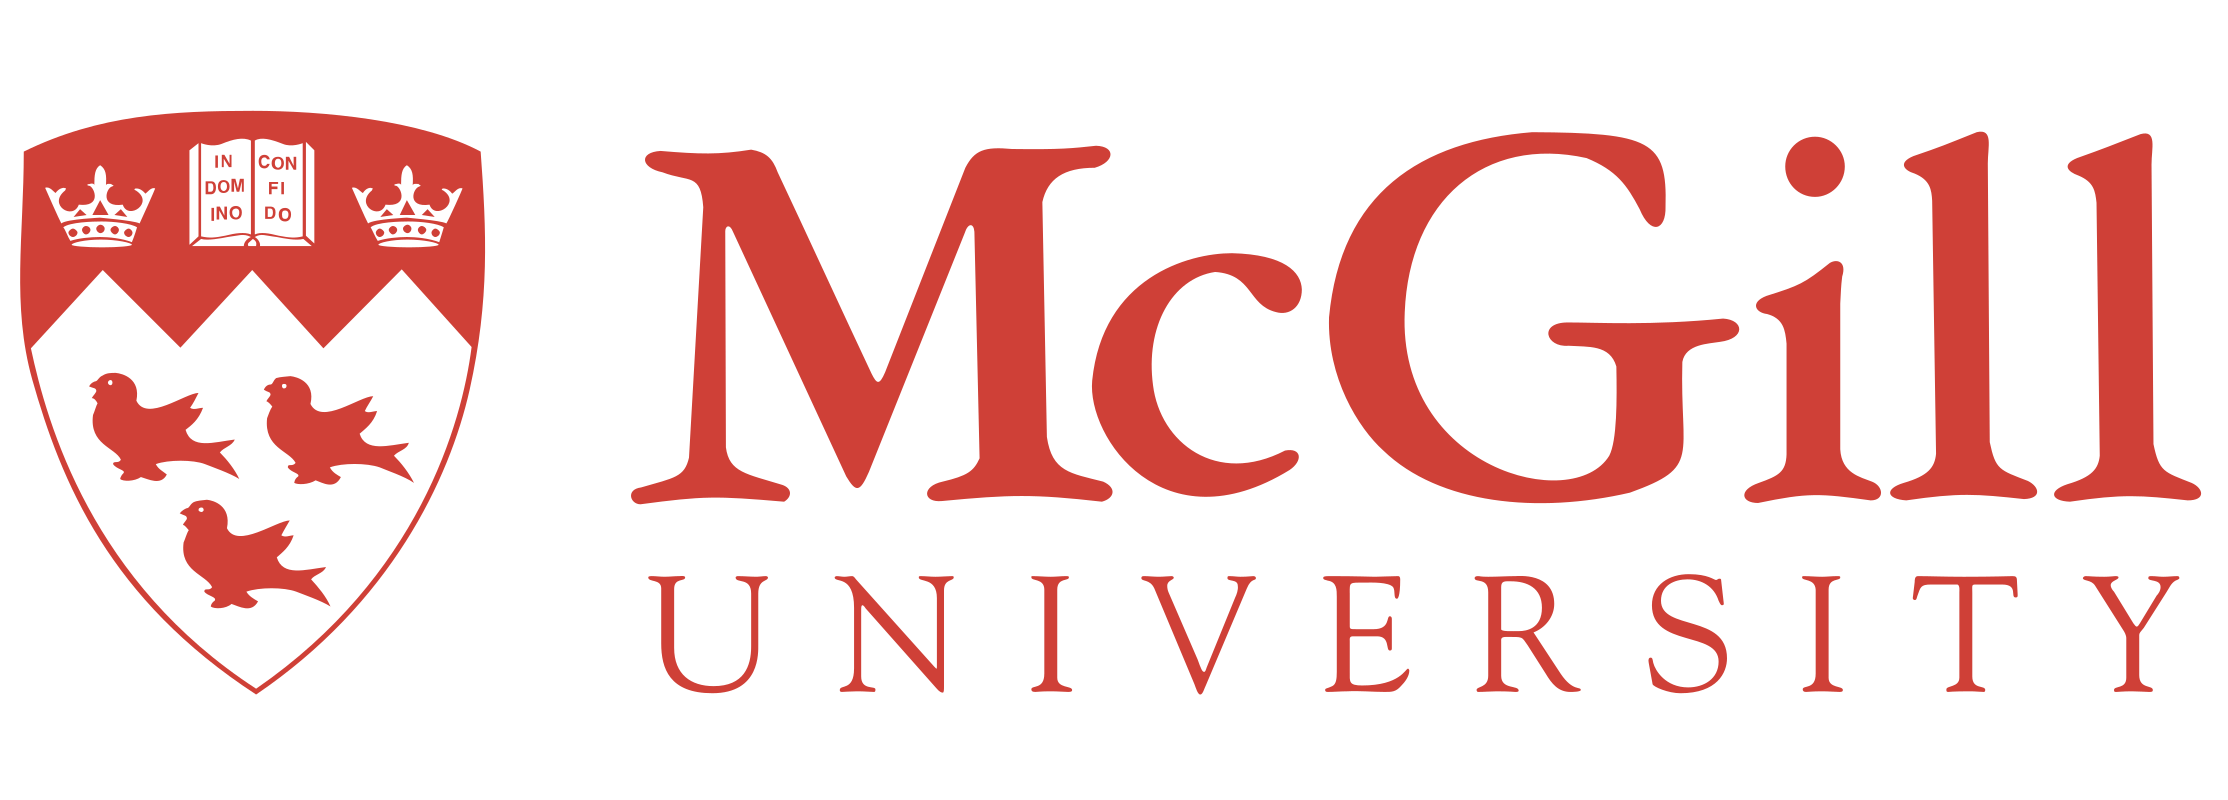 mcgill-university-logo-png-transparent cropped - Study Architecture |  Architecture Schools and Student Information